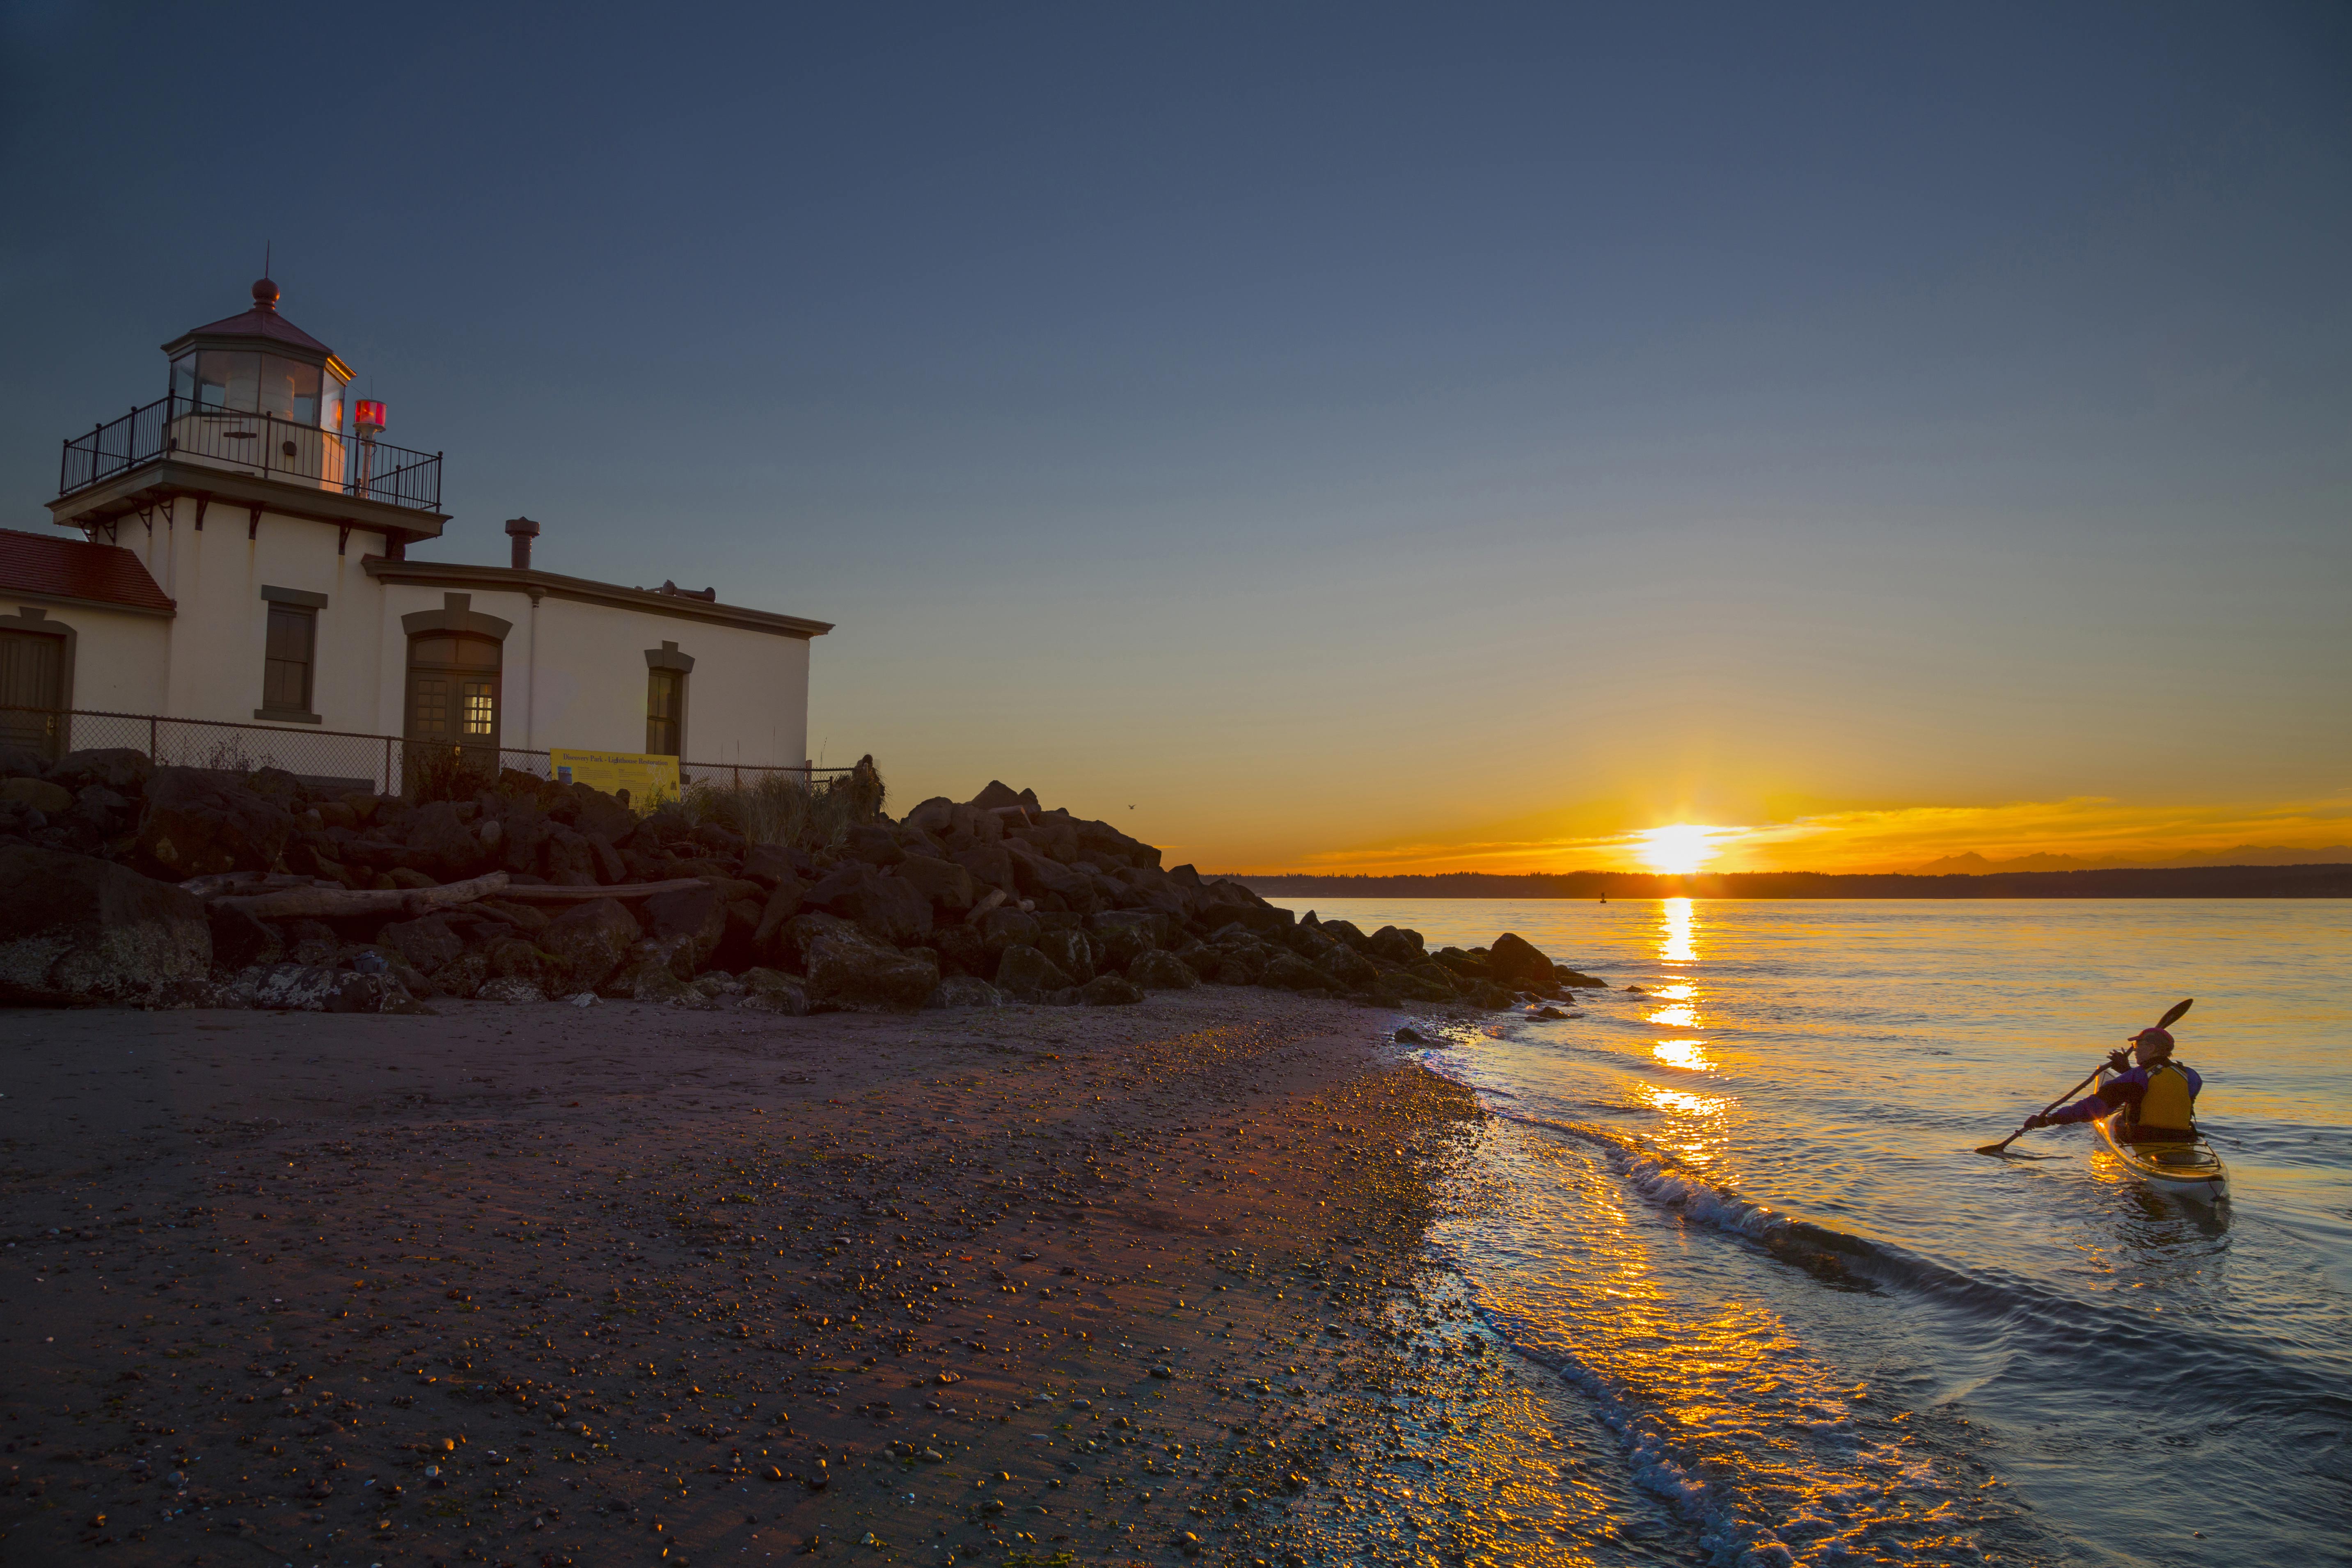 A kayaker takes a sunset trip near the West Point Lighthouse in Discovery Park. Image by Danita Delimont / Gallo Images / Getty